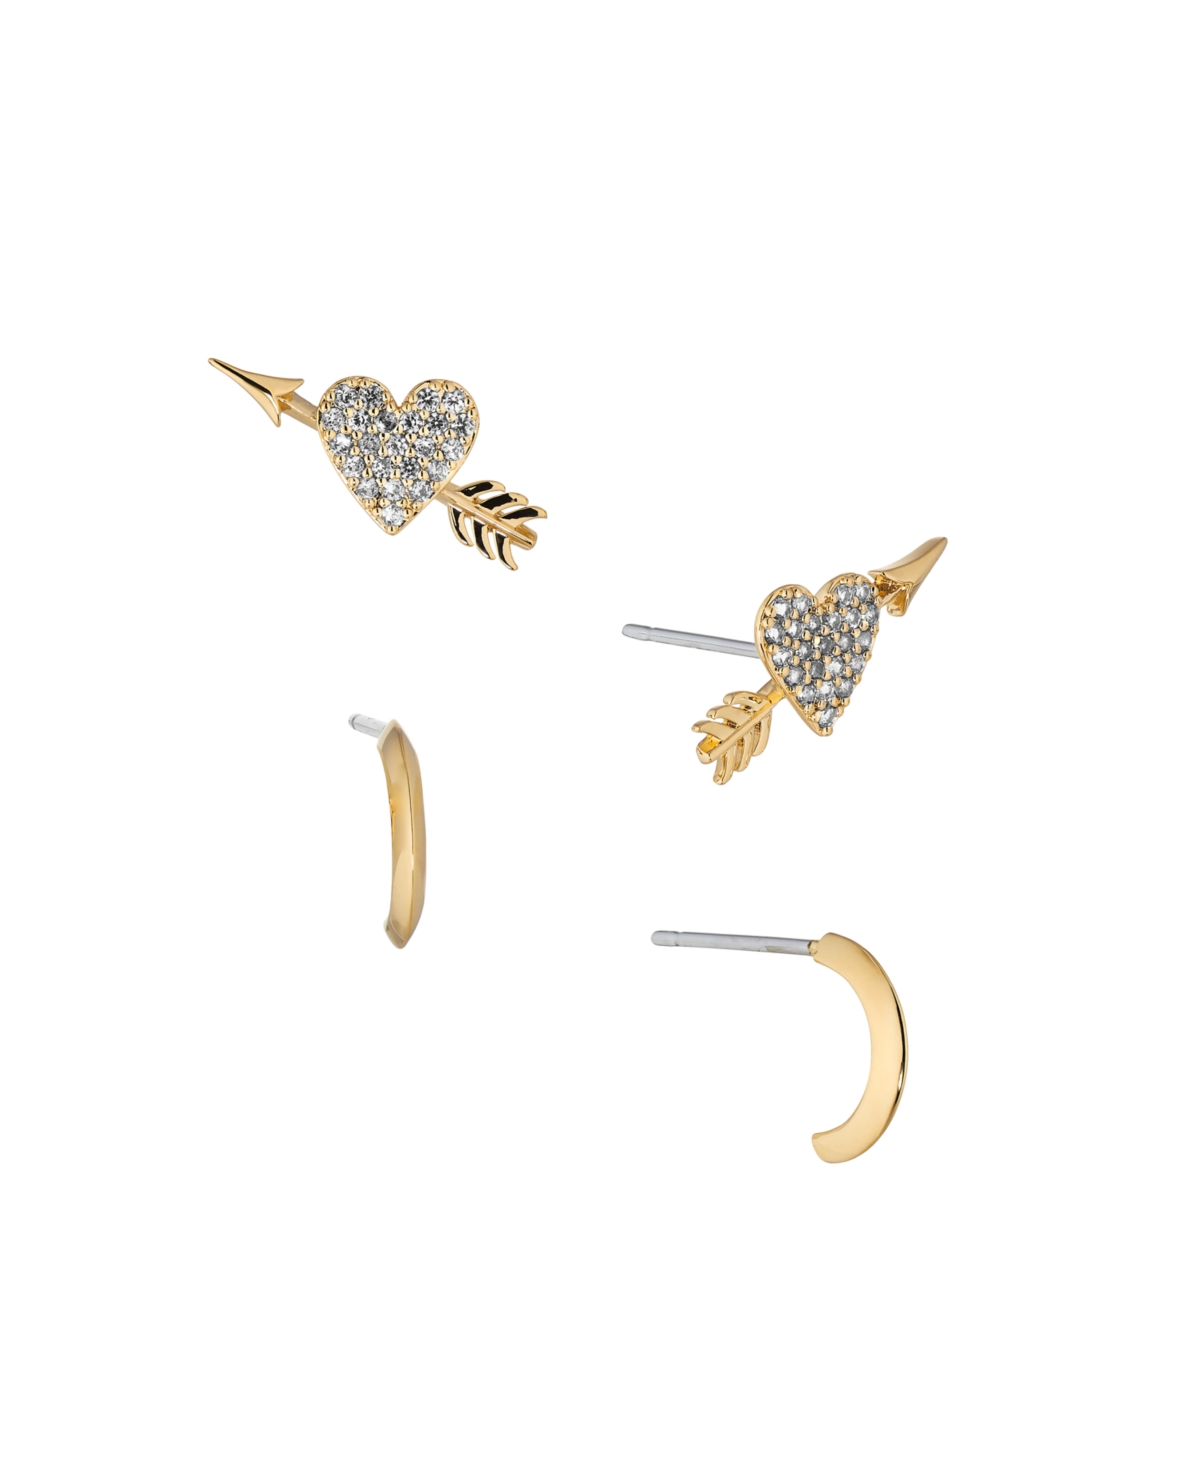 Ava Nadri Drop And Heart Stud Earrings Set, 4 Pieces In Gold Tone